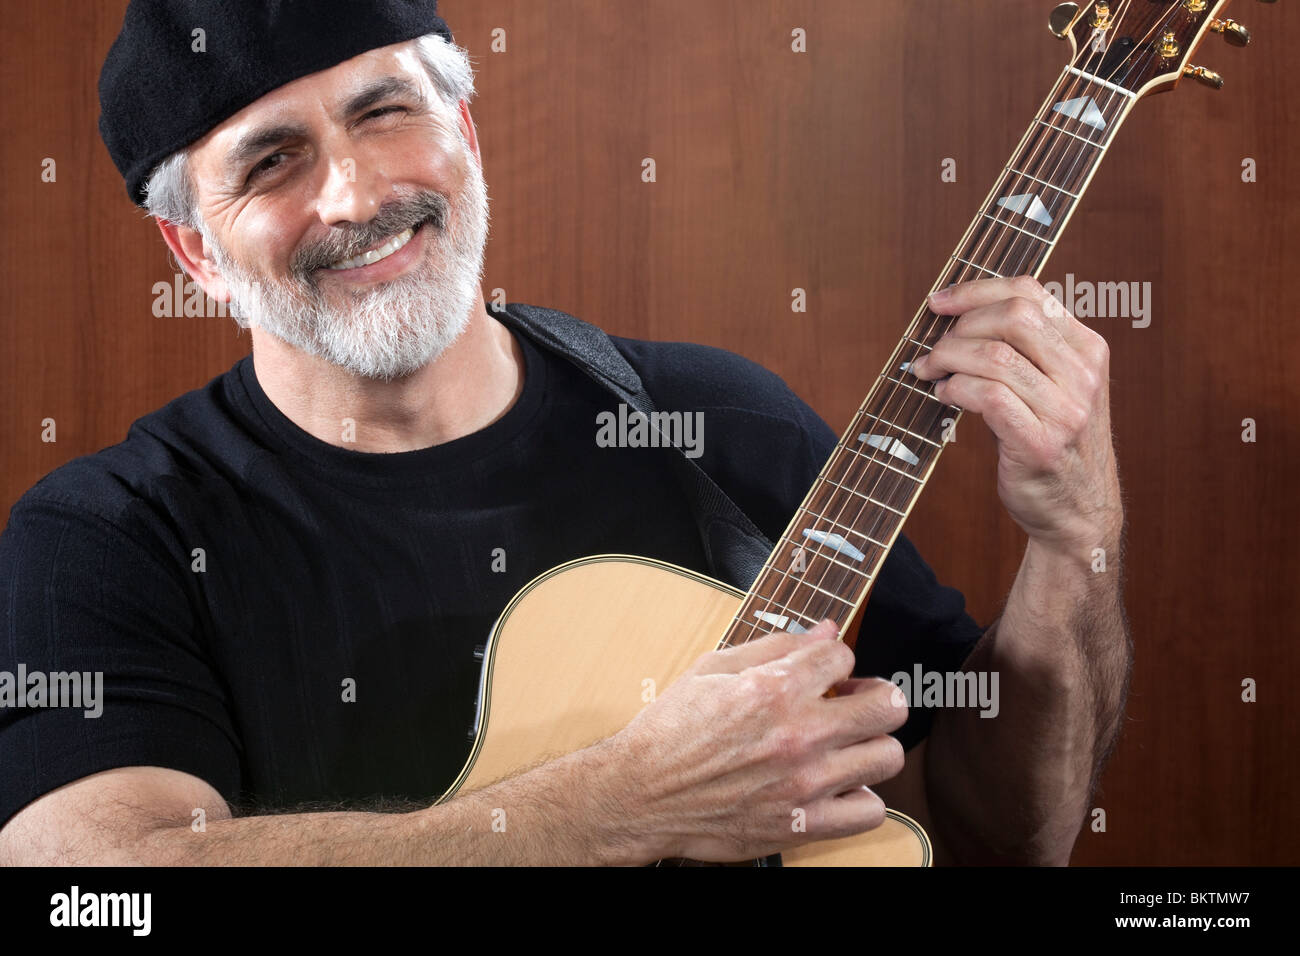 Portrait of a middle-aged man wearing a black beret and t-shirt and playing an acoustic guitar. He is smiling at the camera. Stock Photo